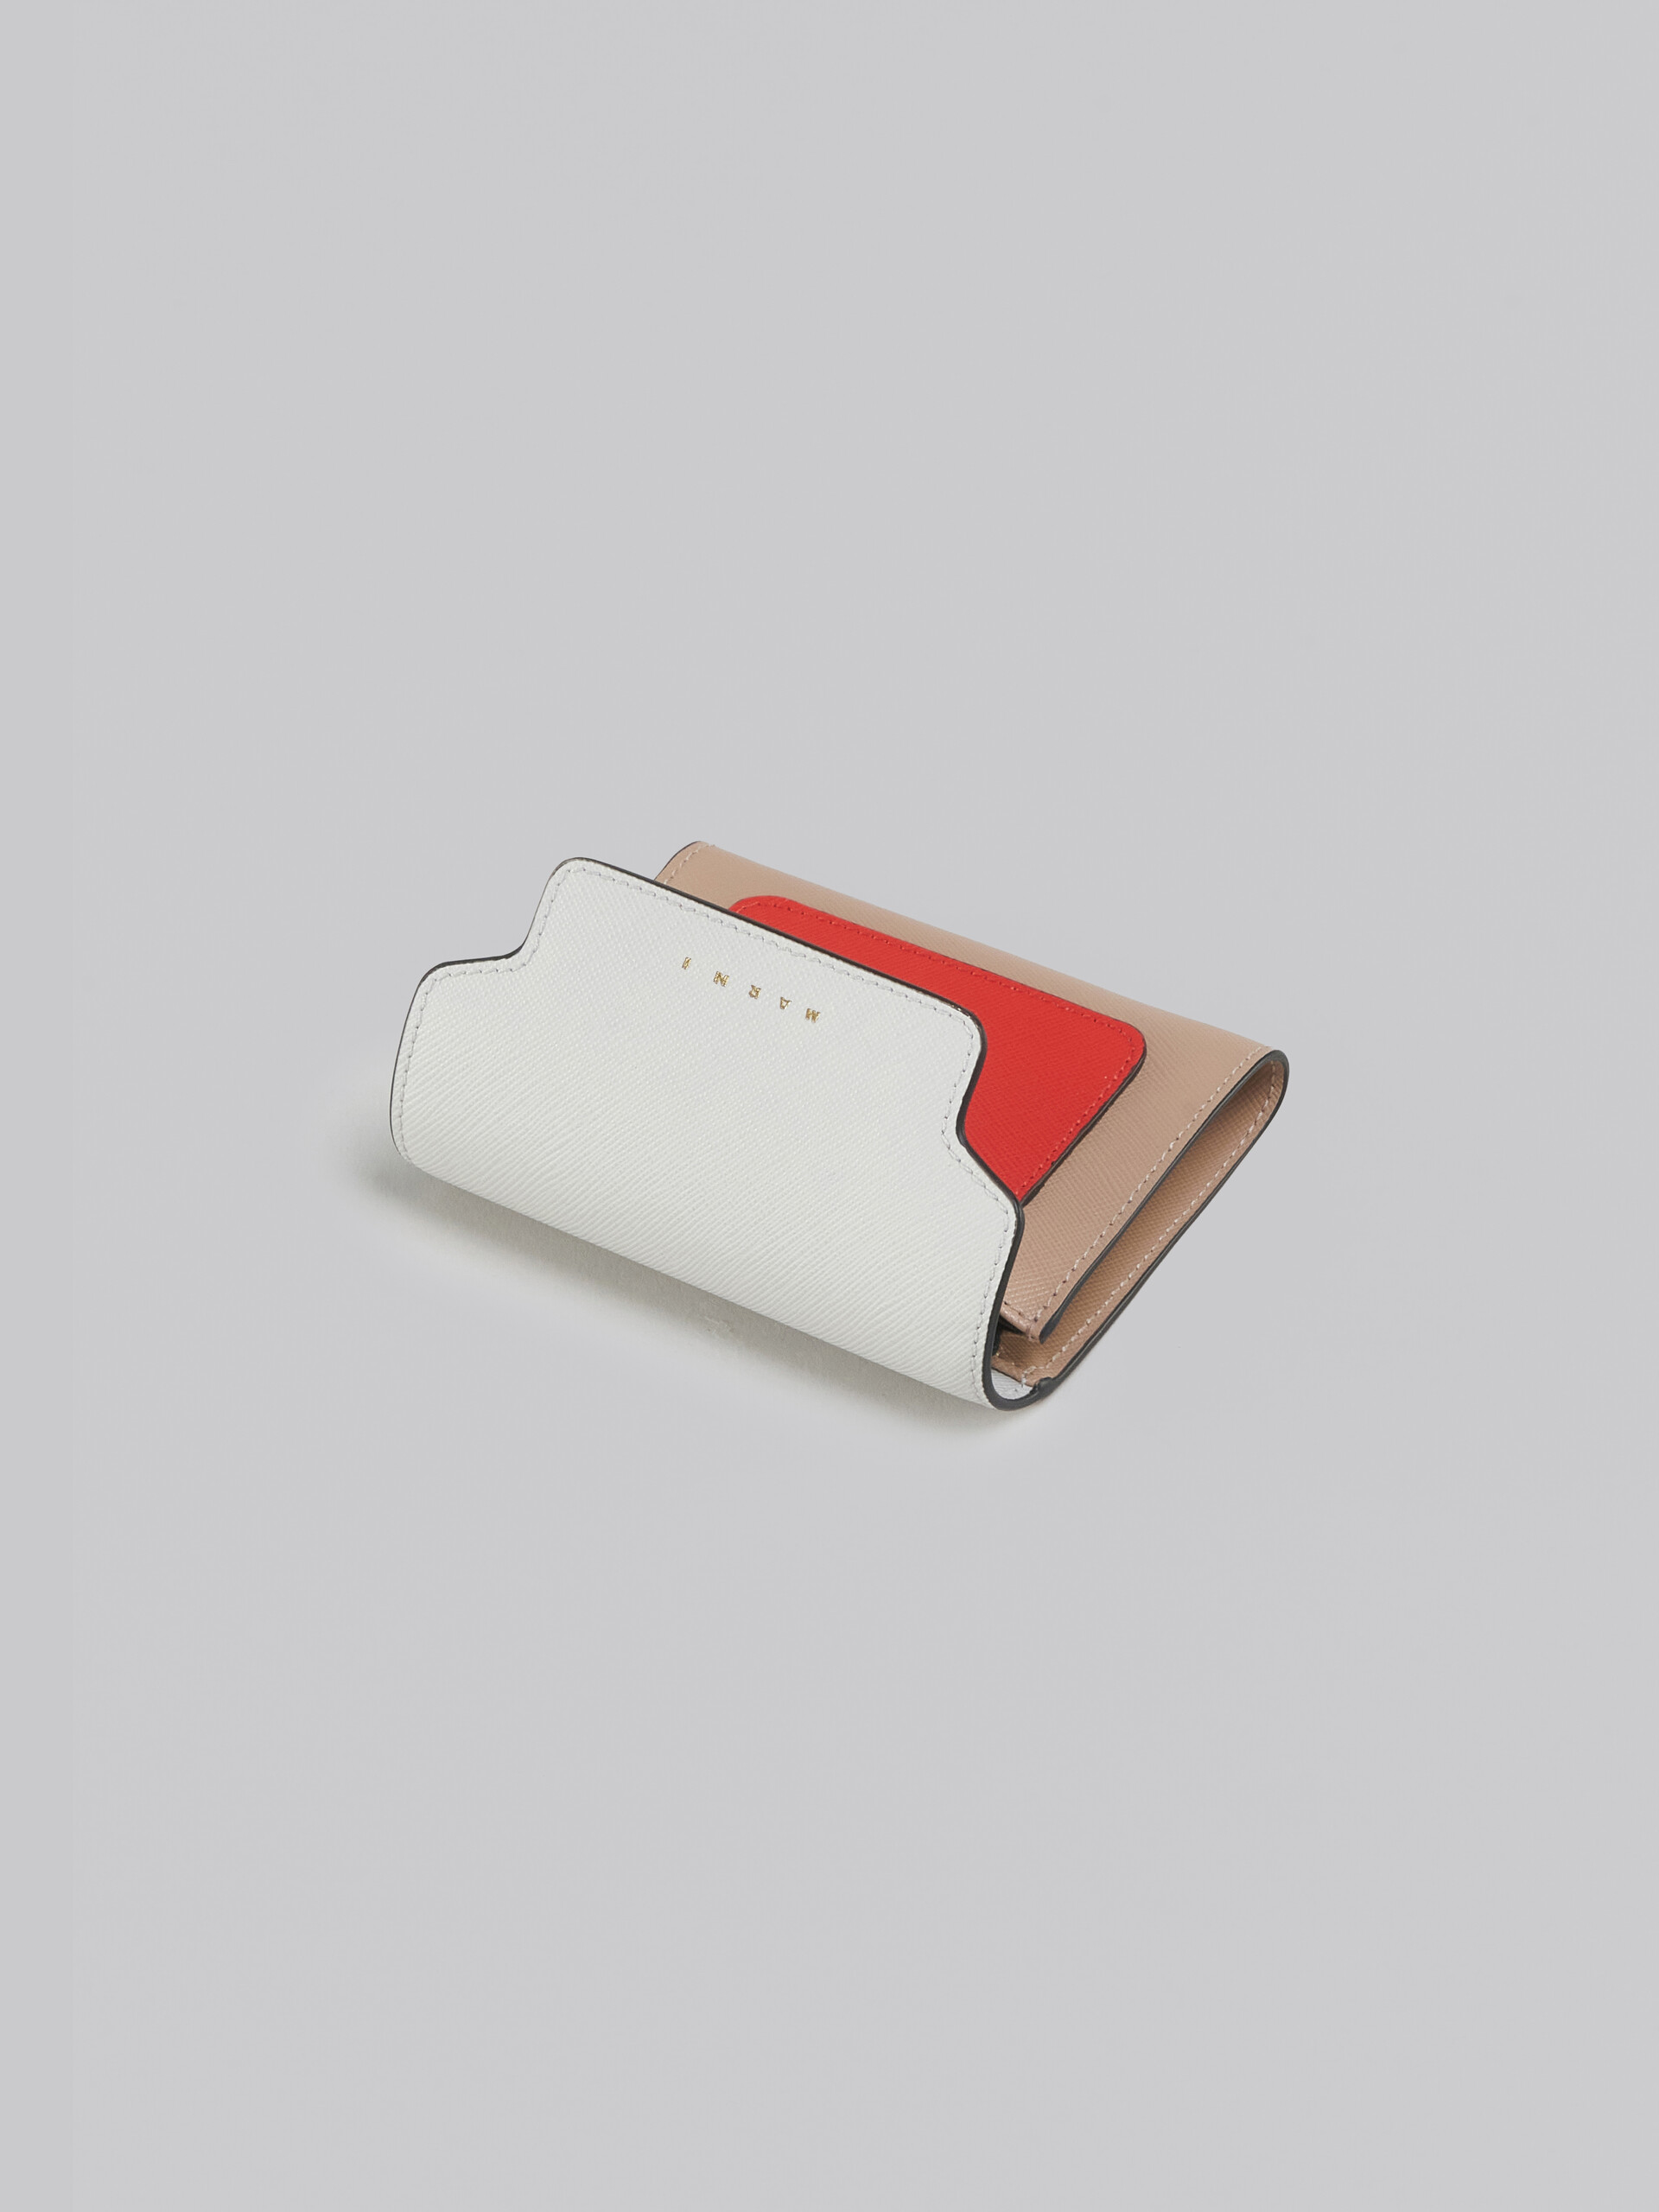 Orange white and beige saffiano leather wallet - Wallets - Image 4